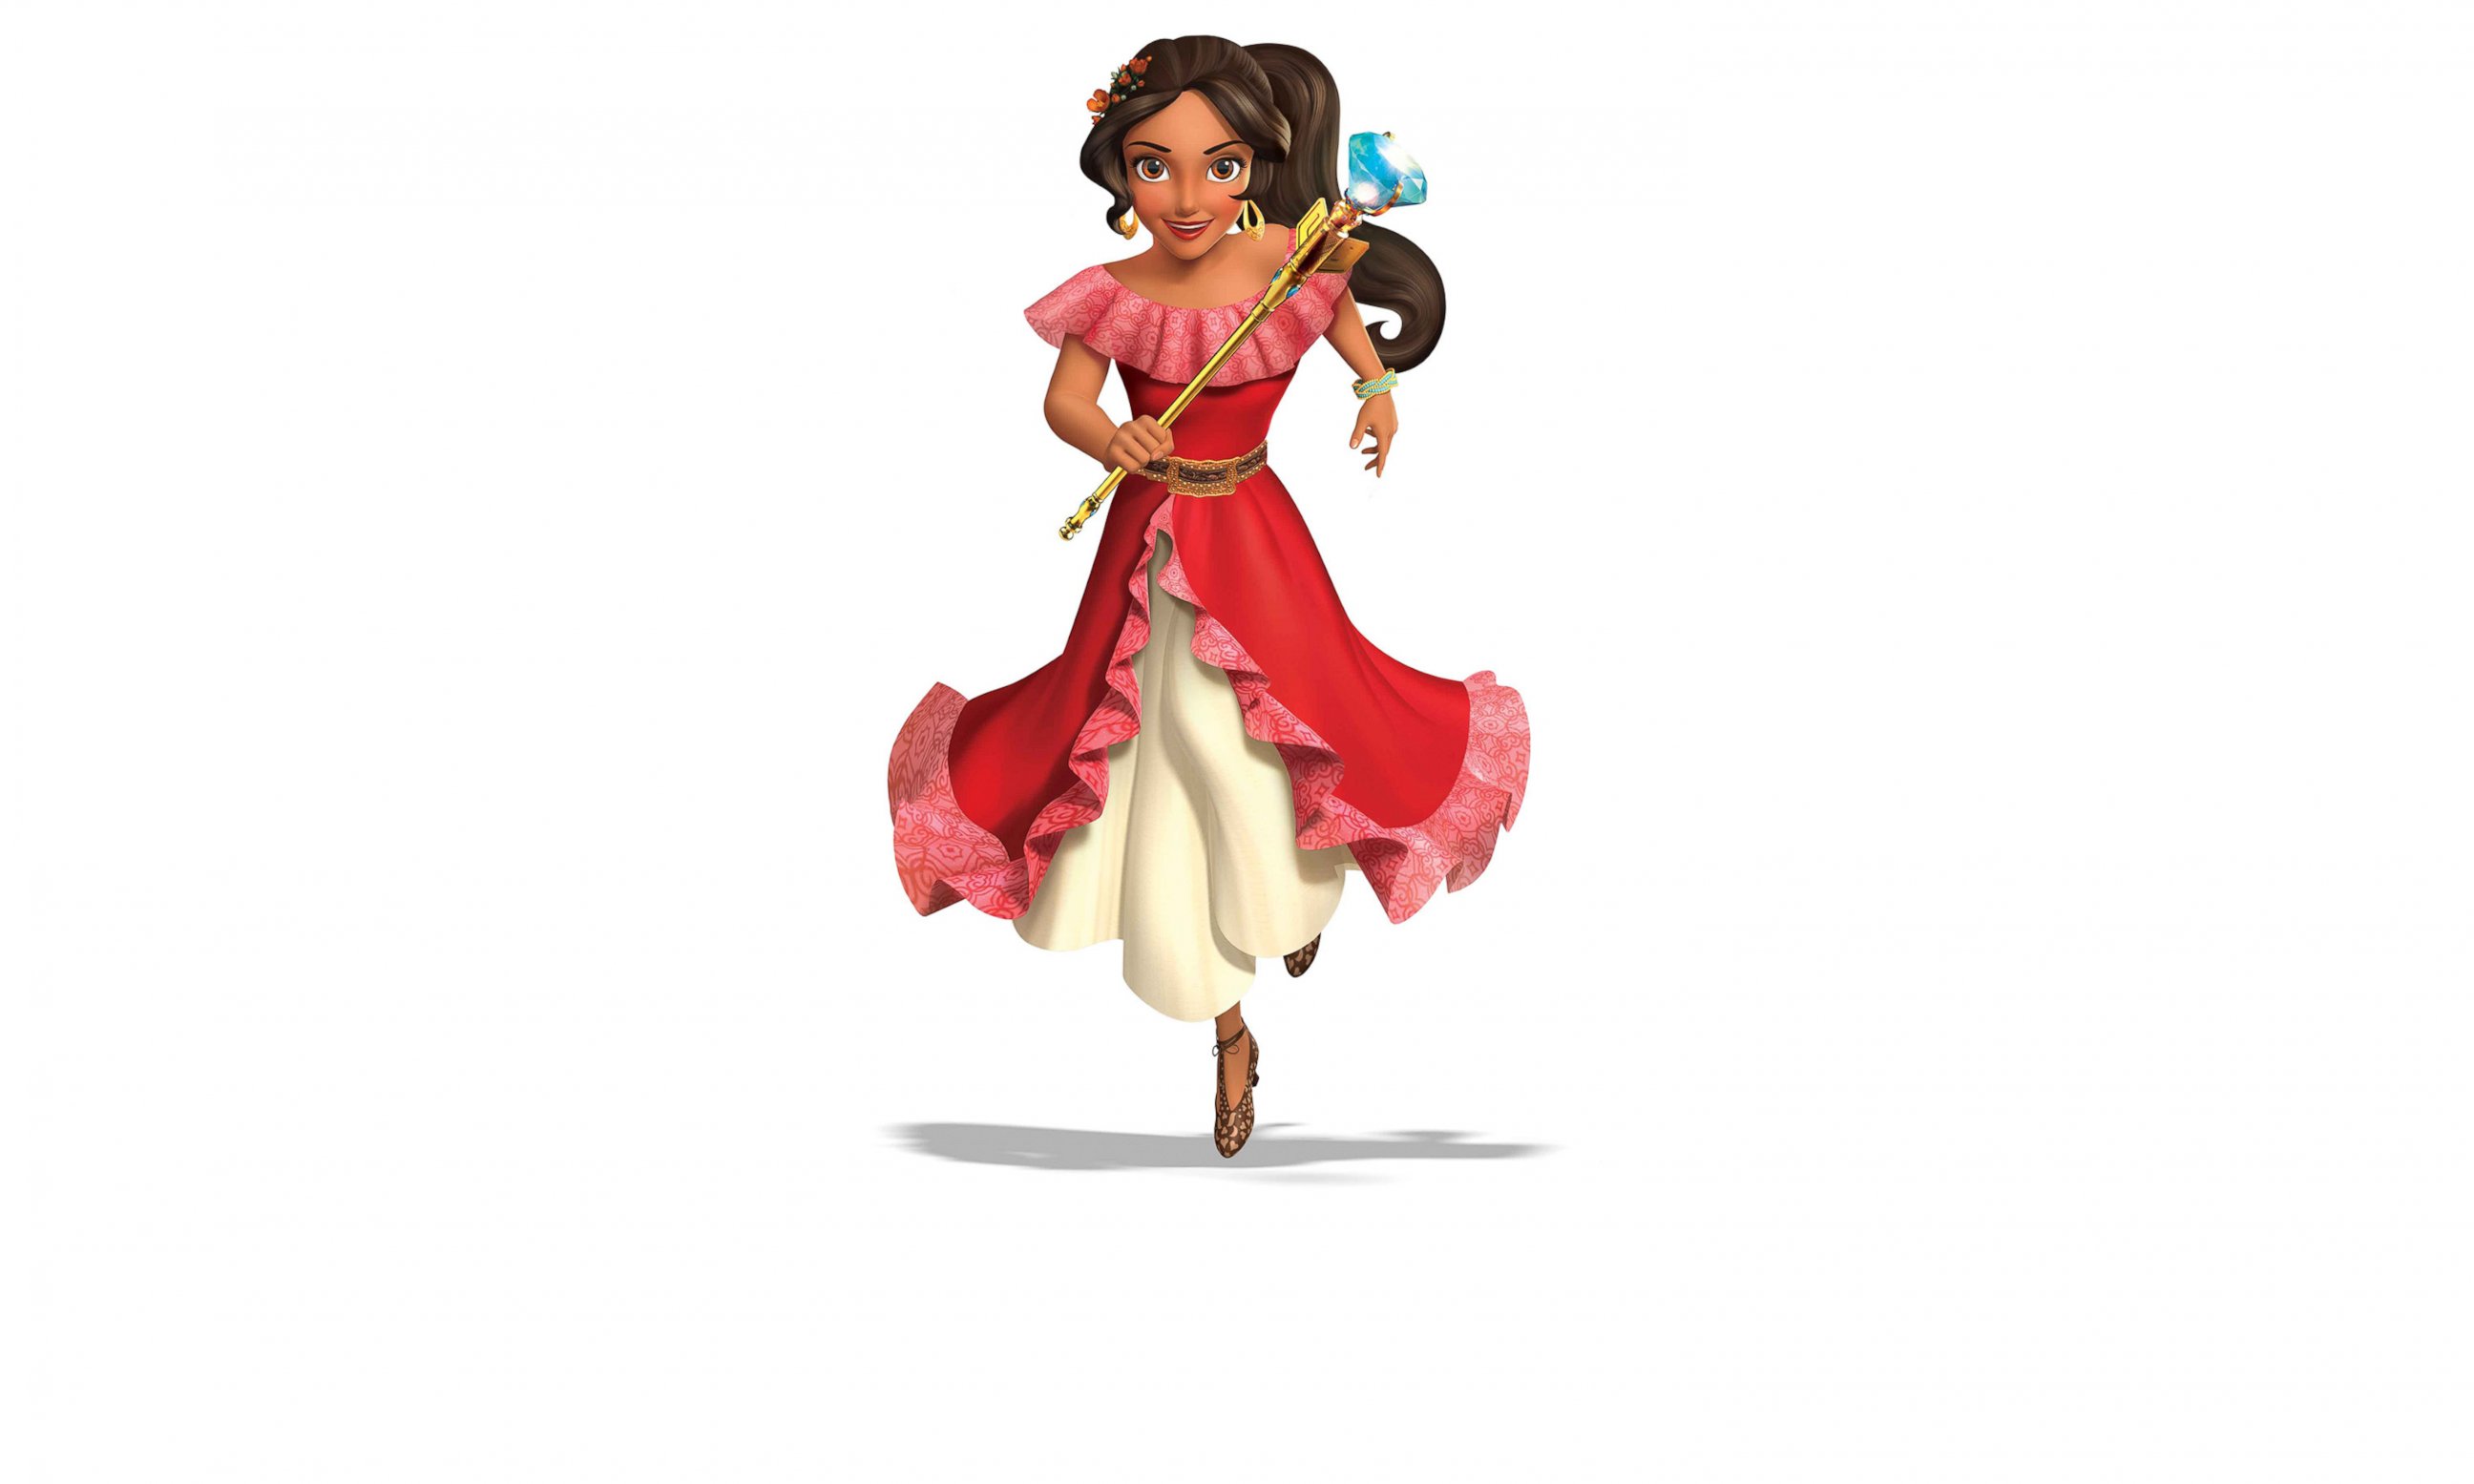 PHOTO: "Elena of Avalor" is an animated series that follows the story of Elena, a brave and adventurous teenager who saves her kingdom from an evil sorceress.